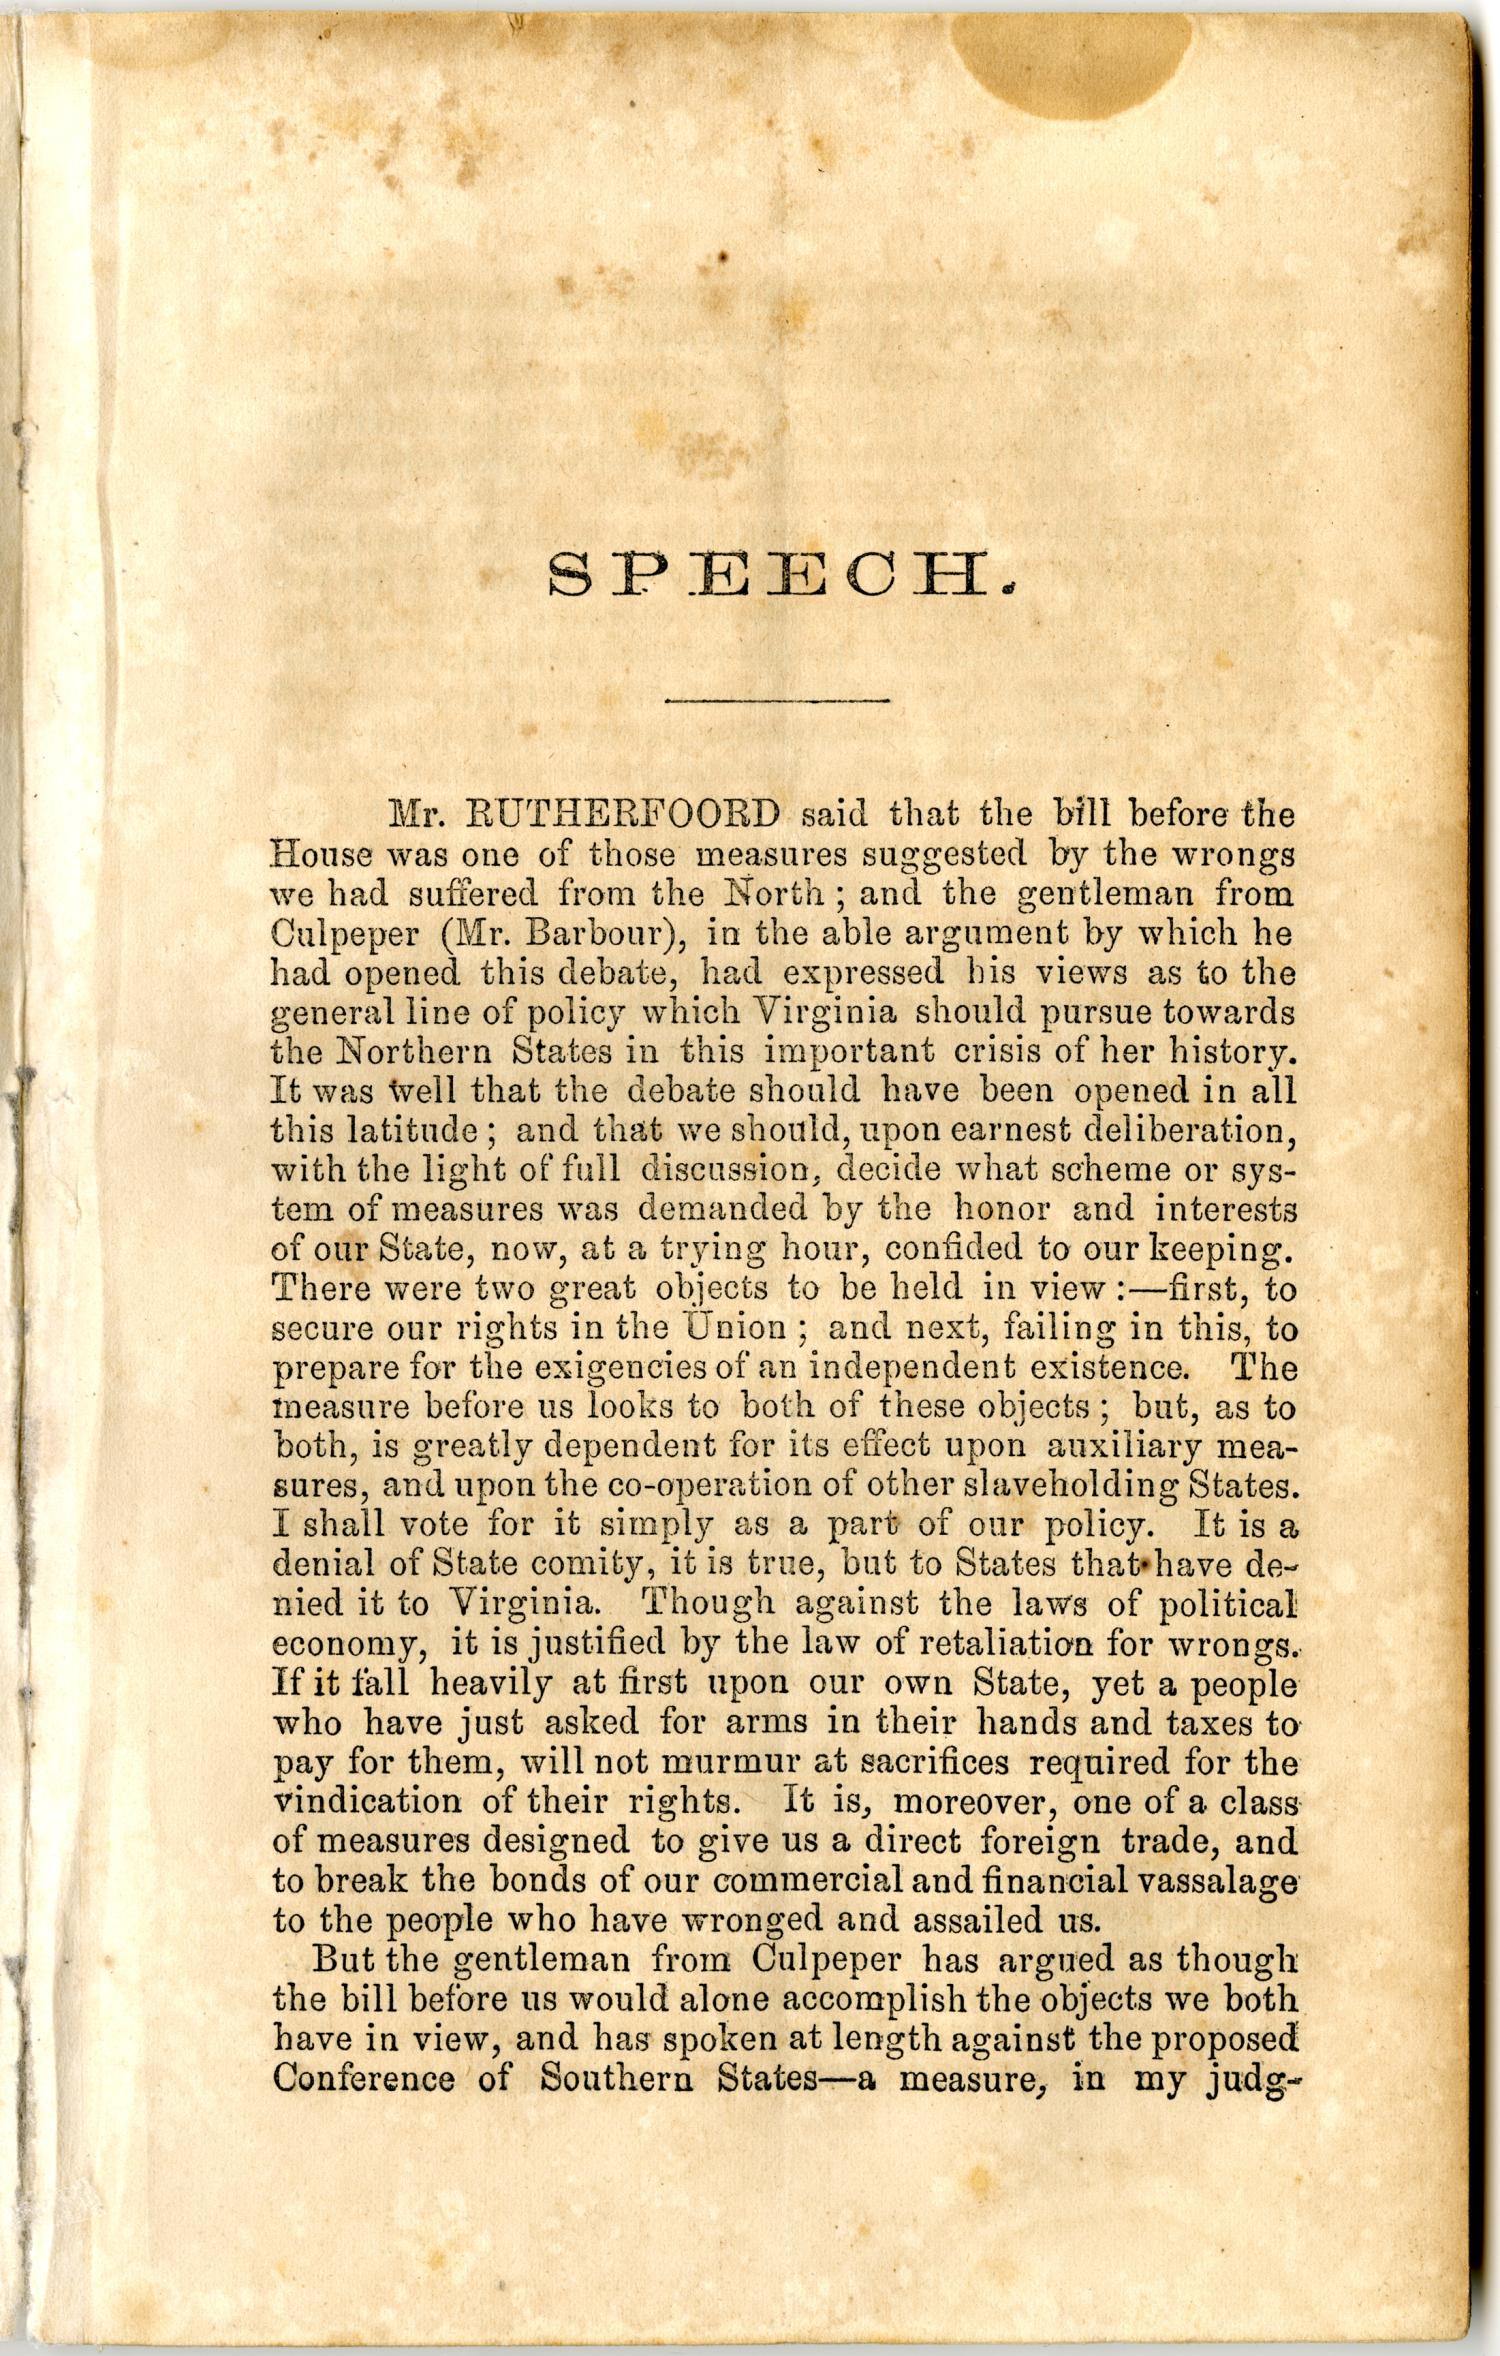 Speech of John C. Rutherfoord, of Goochland : in the House of Delegates of Virginia, 21 February, 1860, in favor of the proposed conference of southern states.
                                                
                                                    [Sequence #]: 3 of 27
                                                